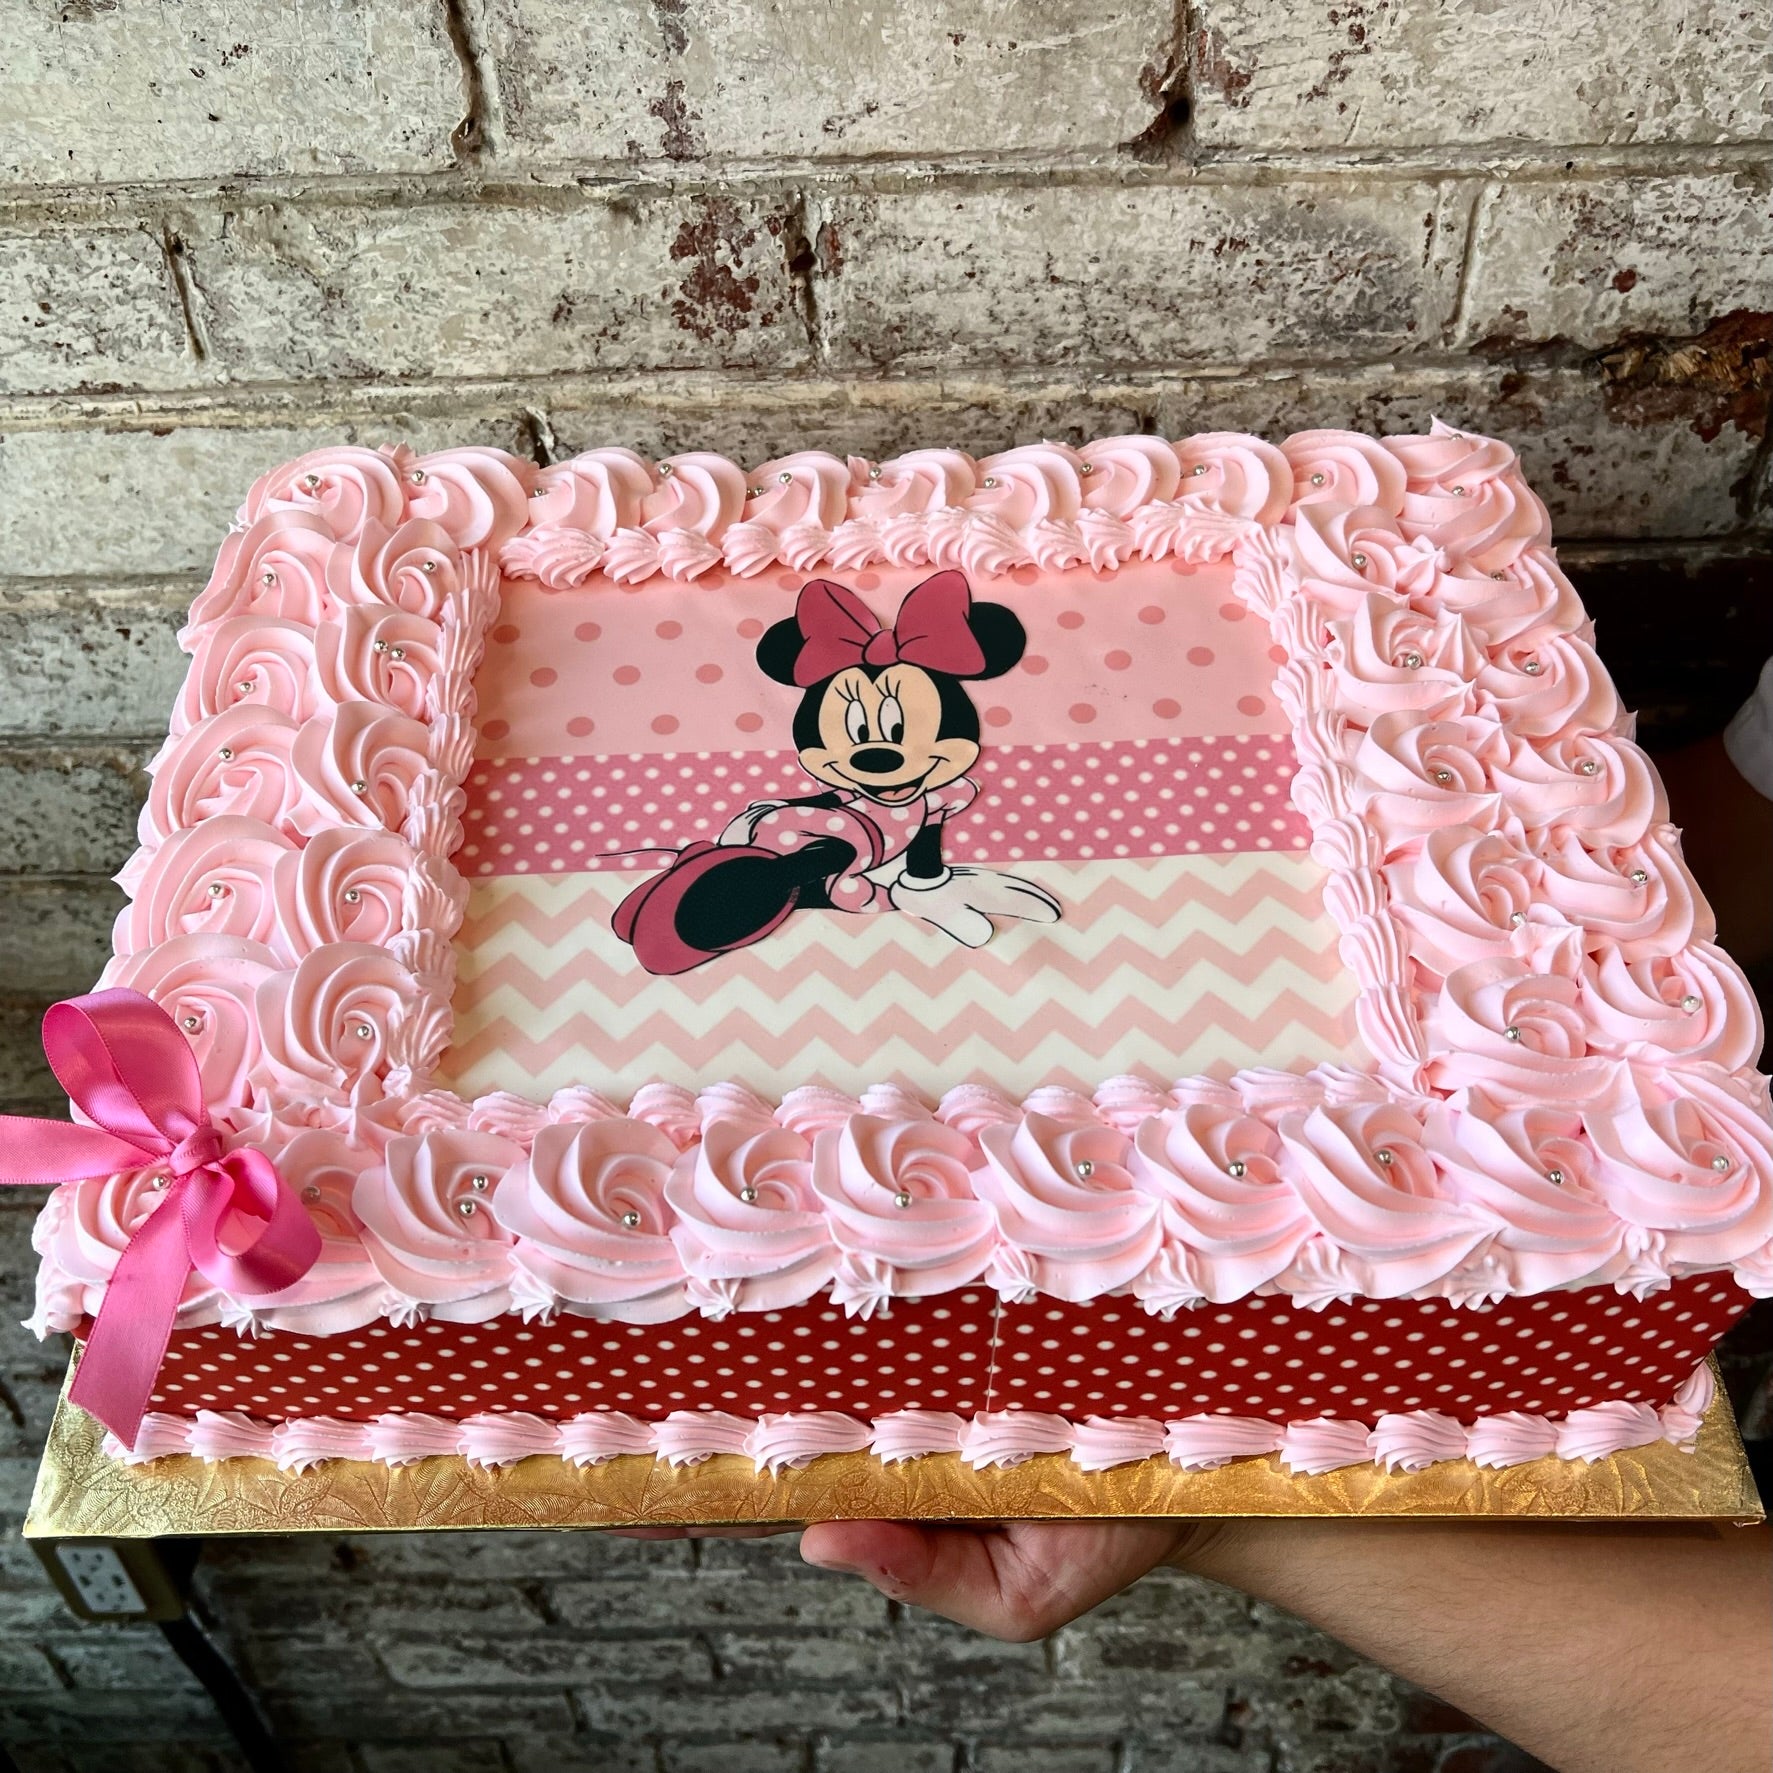 Pink cake with Minnie Mouse theme